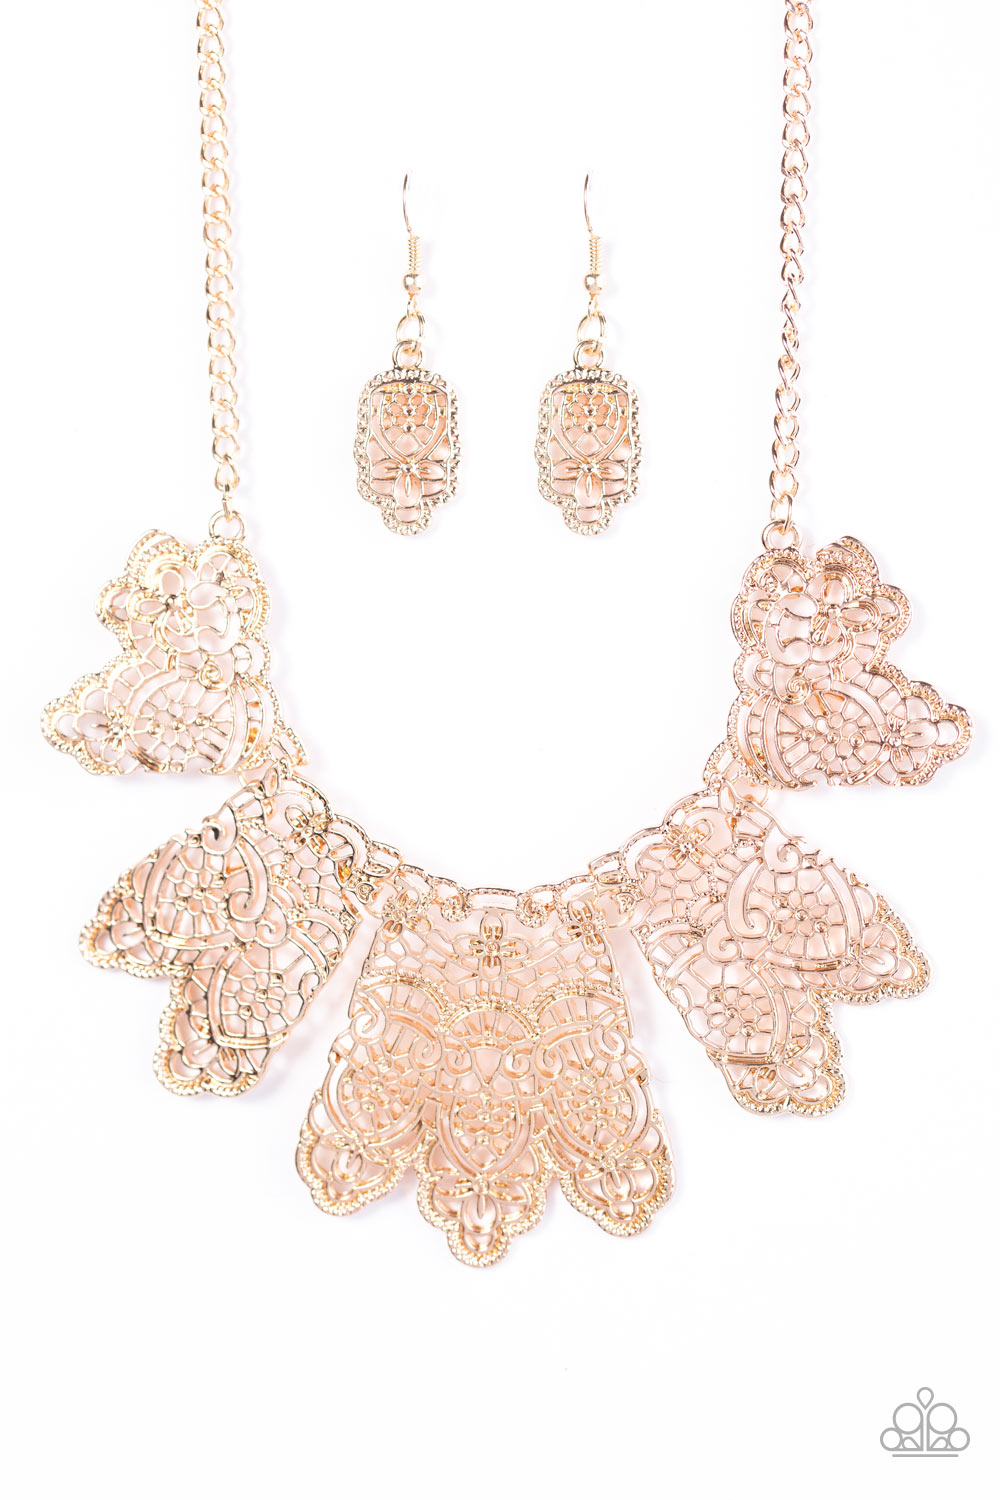 Empire State Shimmer - Gold - Paparazzi necklace